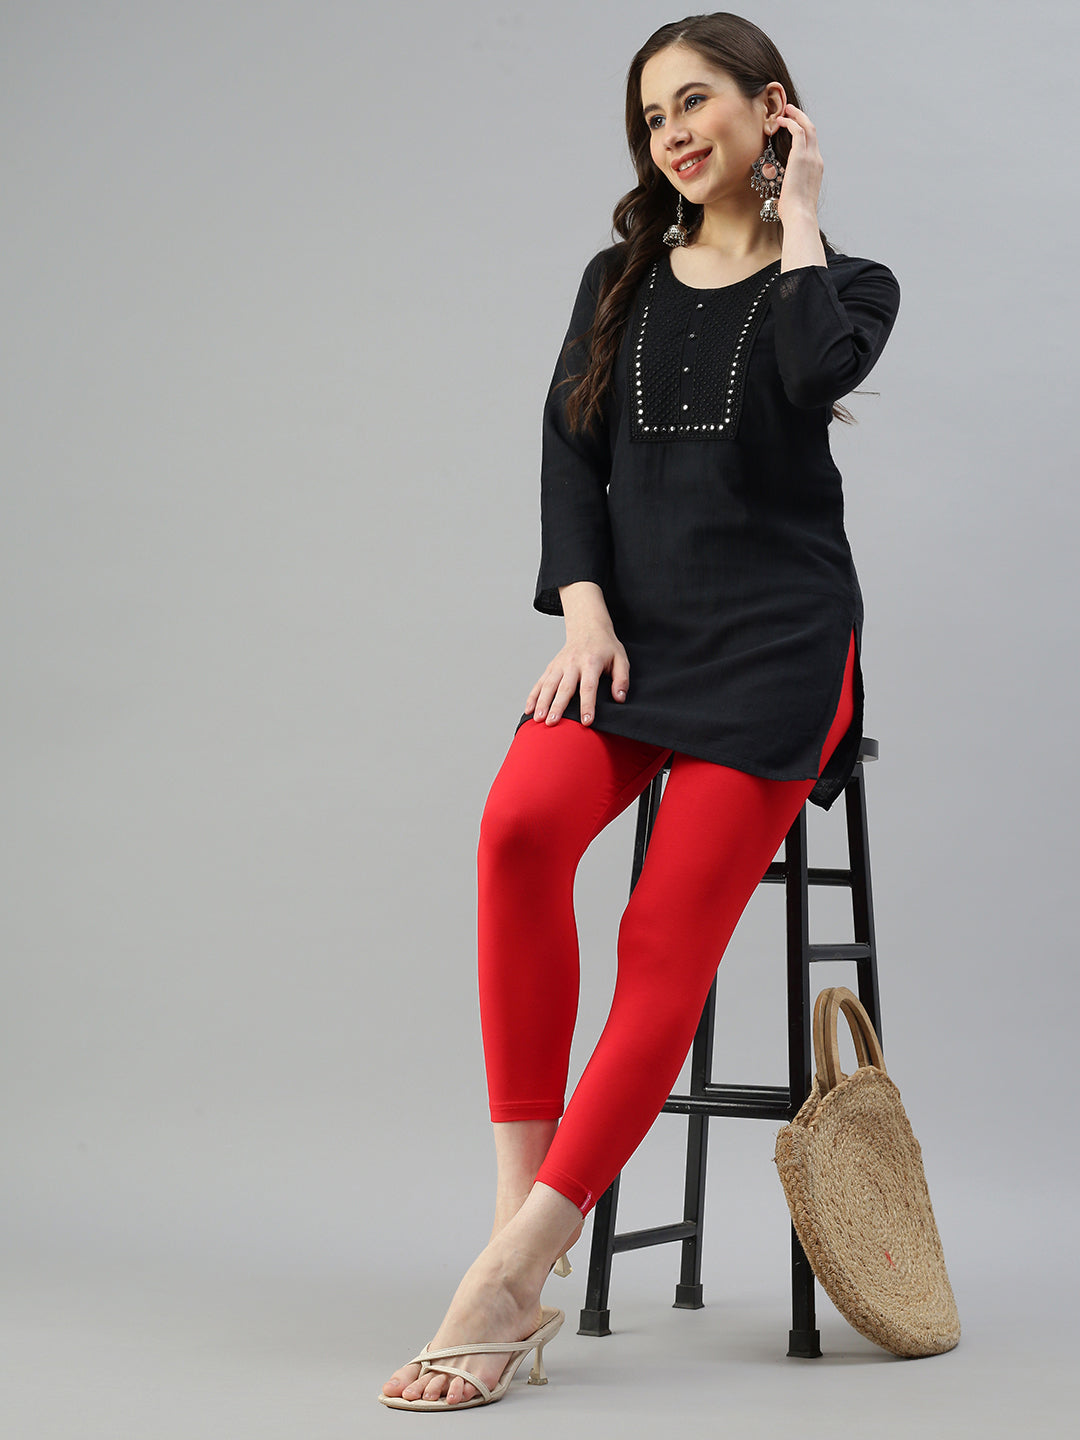 Shop Prisma's Red Cuff-Length Leggings for Comfortable Style